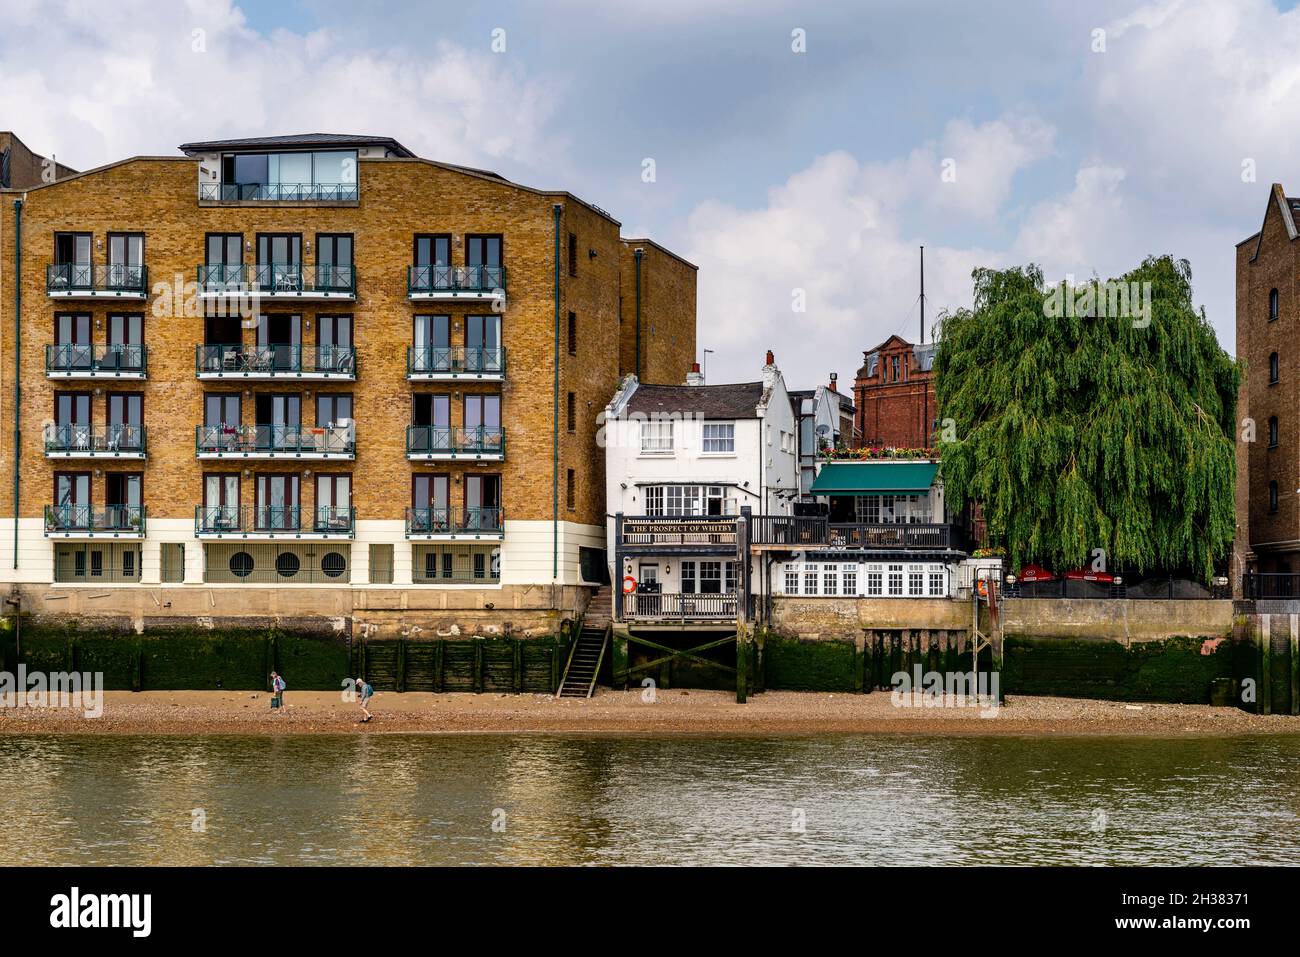 The Prospect of Whitby Riverside Pub and River Thames, London, Großbritannien. Stockfoto